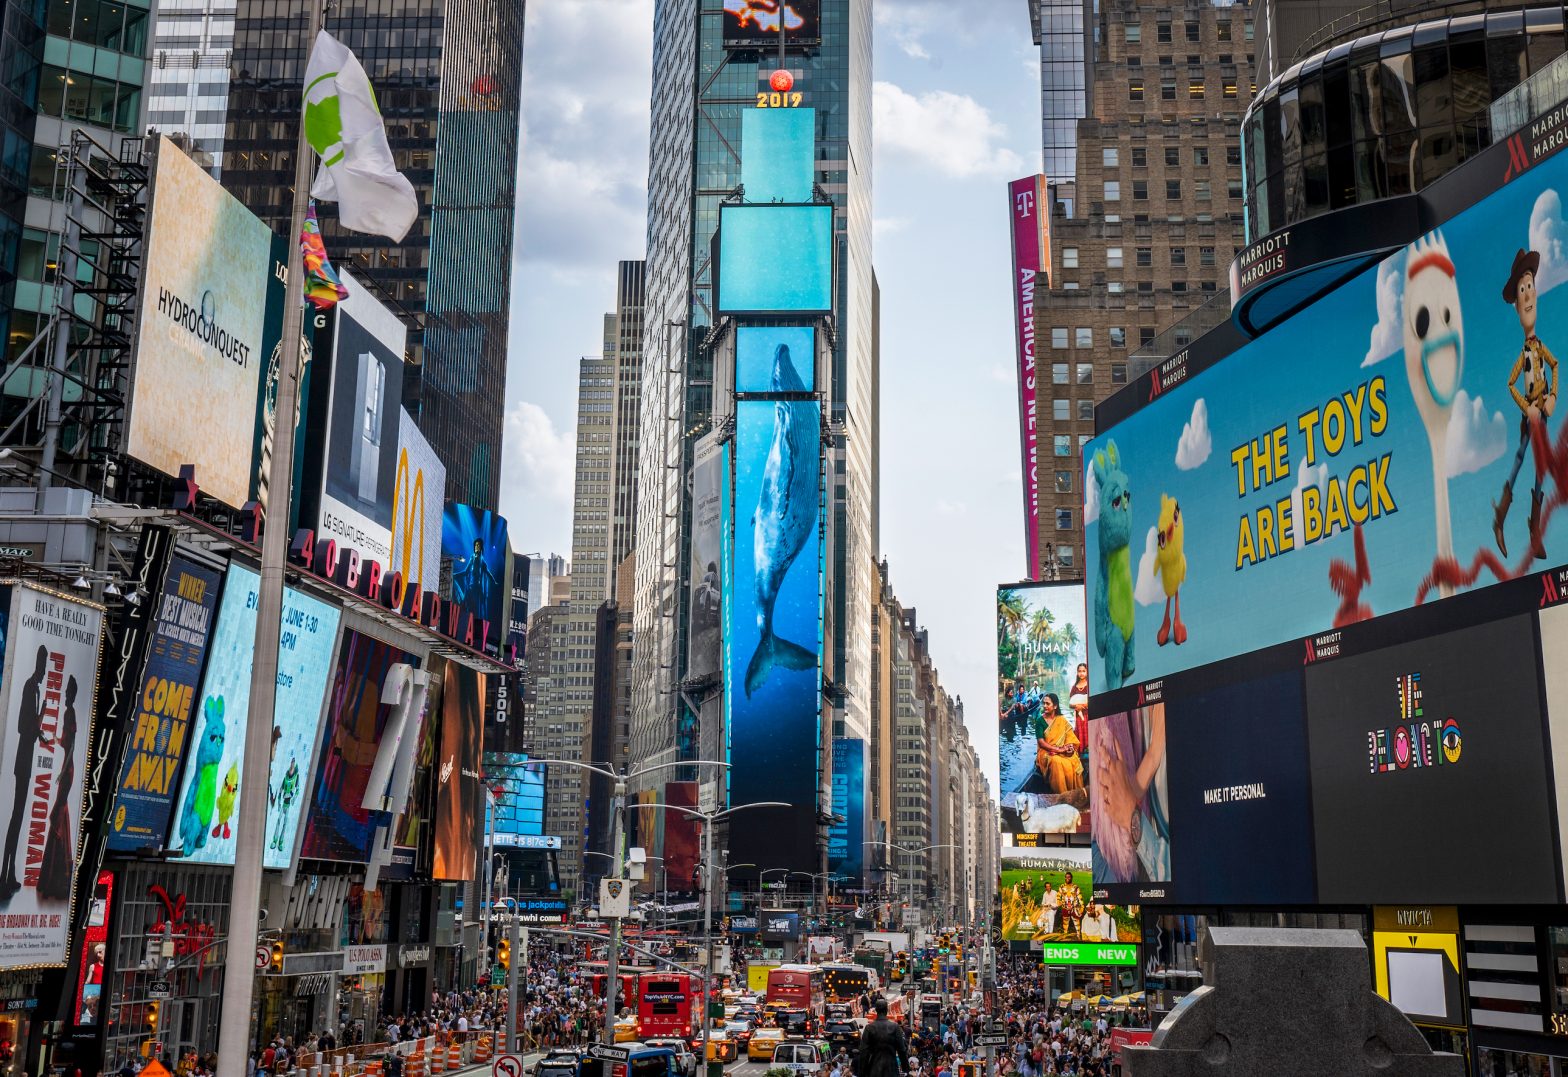 New York’s Iconic One Times Square to Undergo $500M Facelift